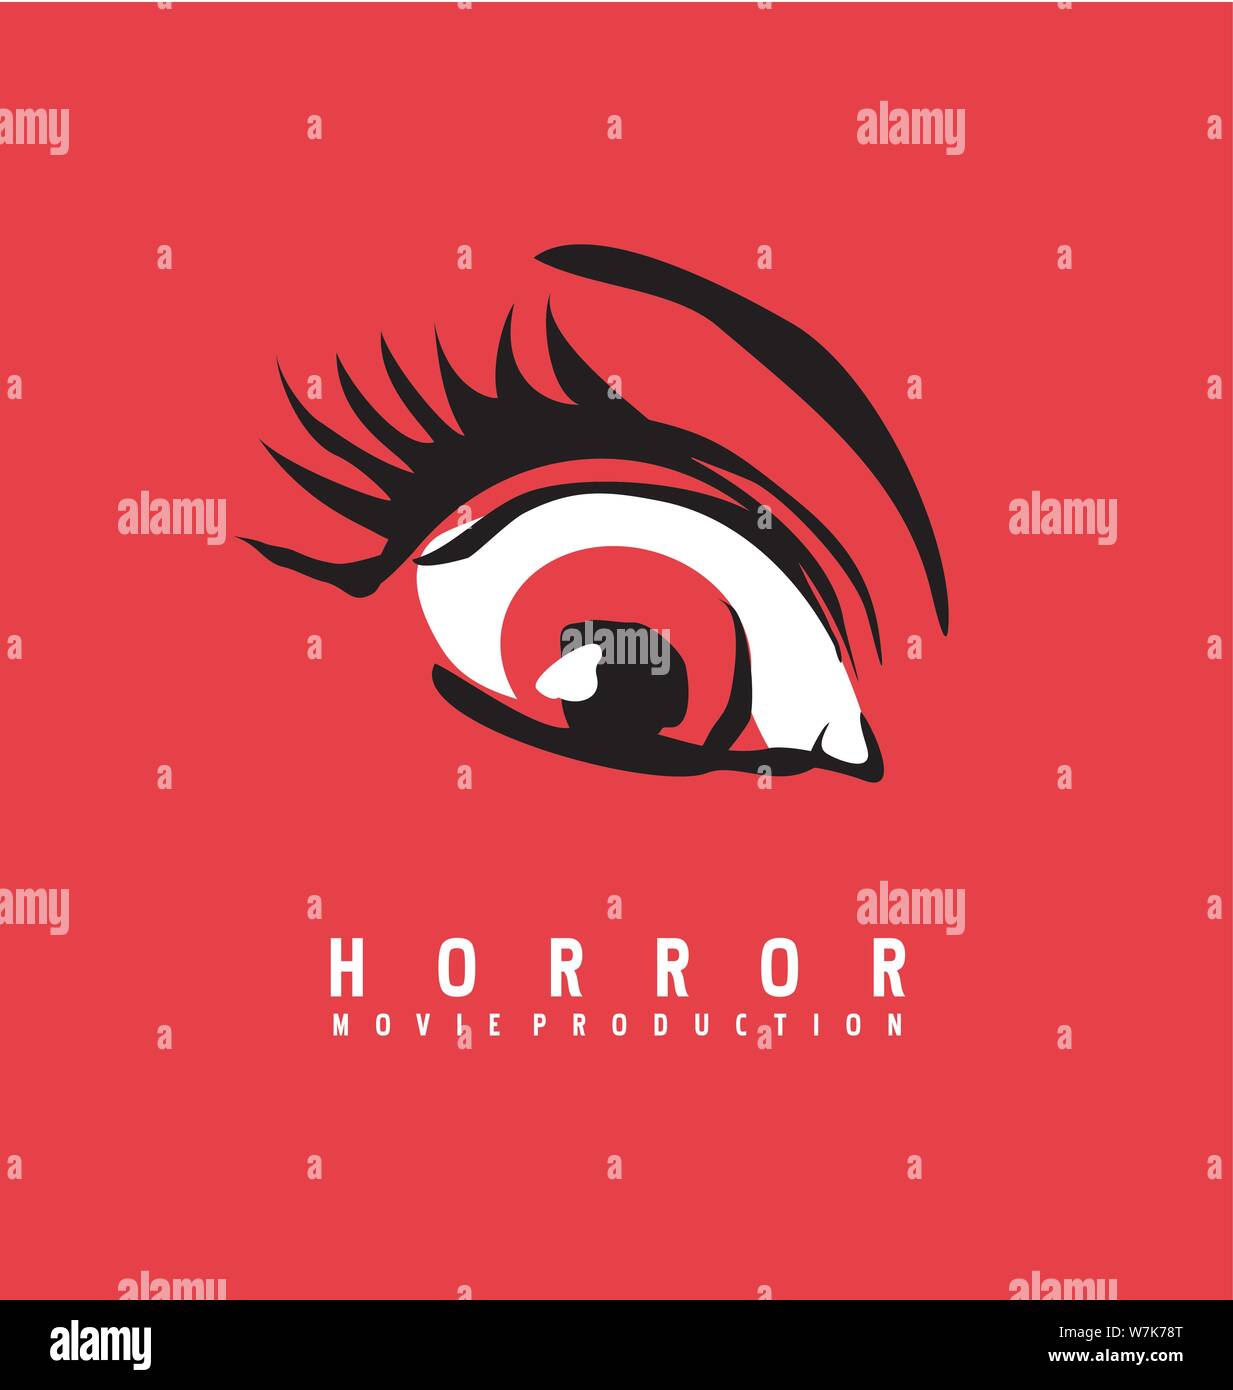 Horror movie production business logo design concept. Eye symbol drawing on red background. Vector illustration. Stock Vector